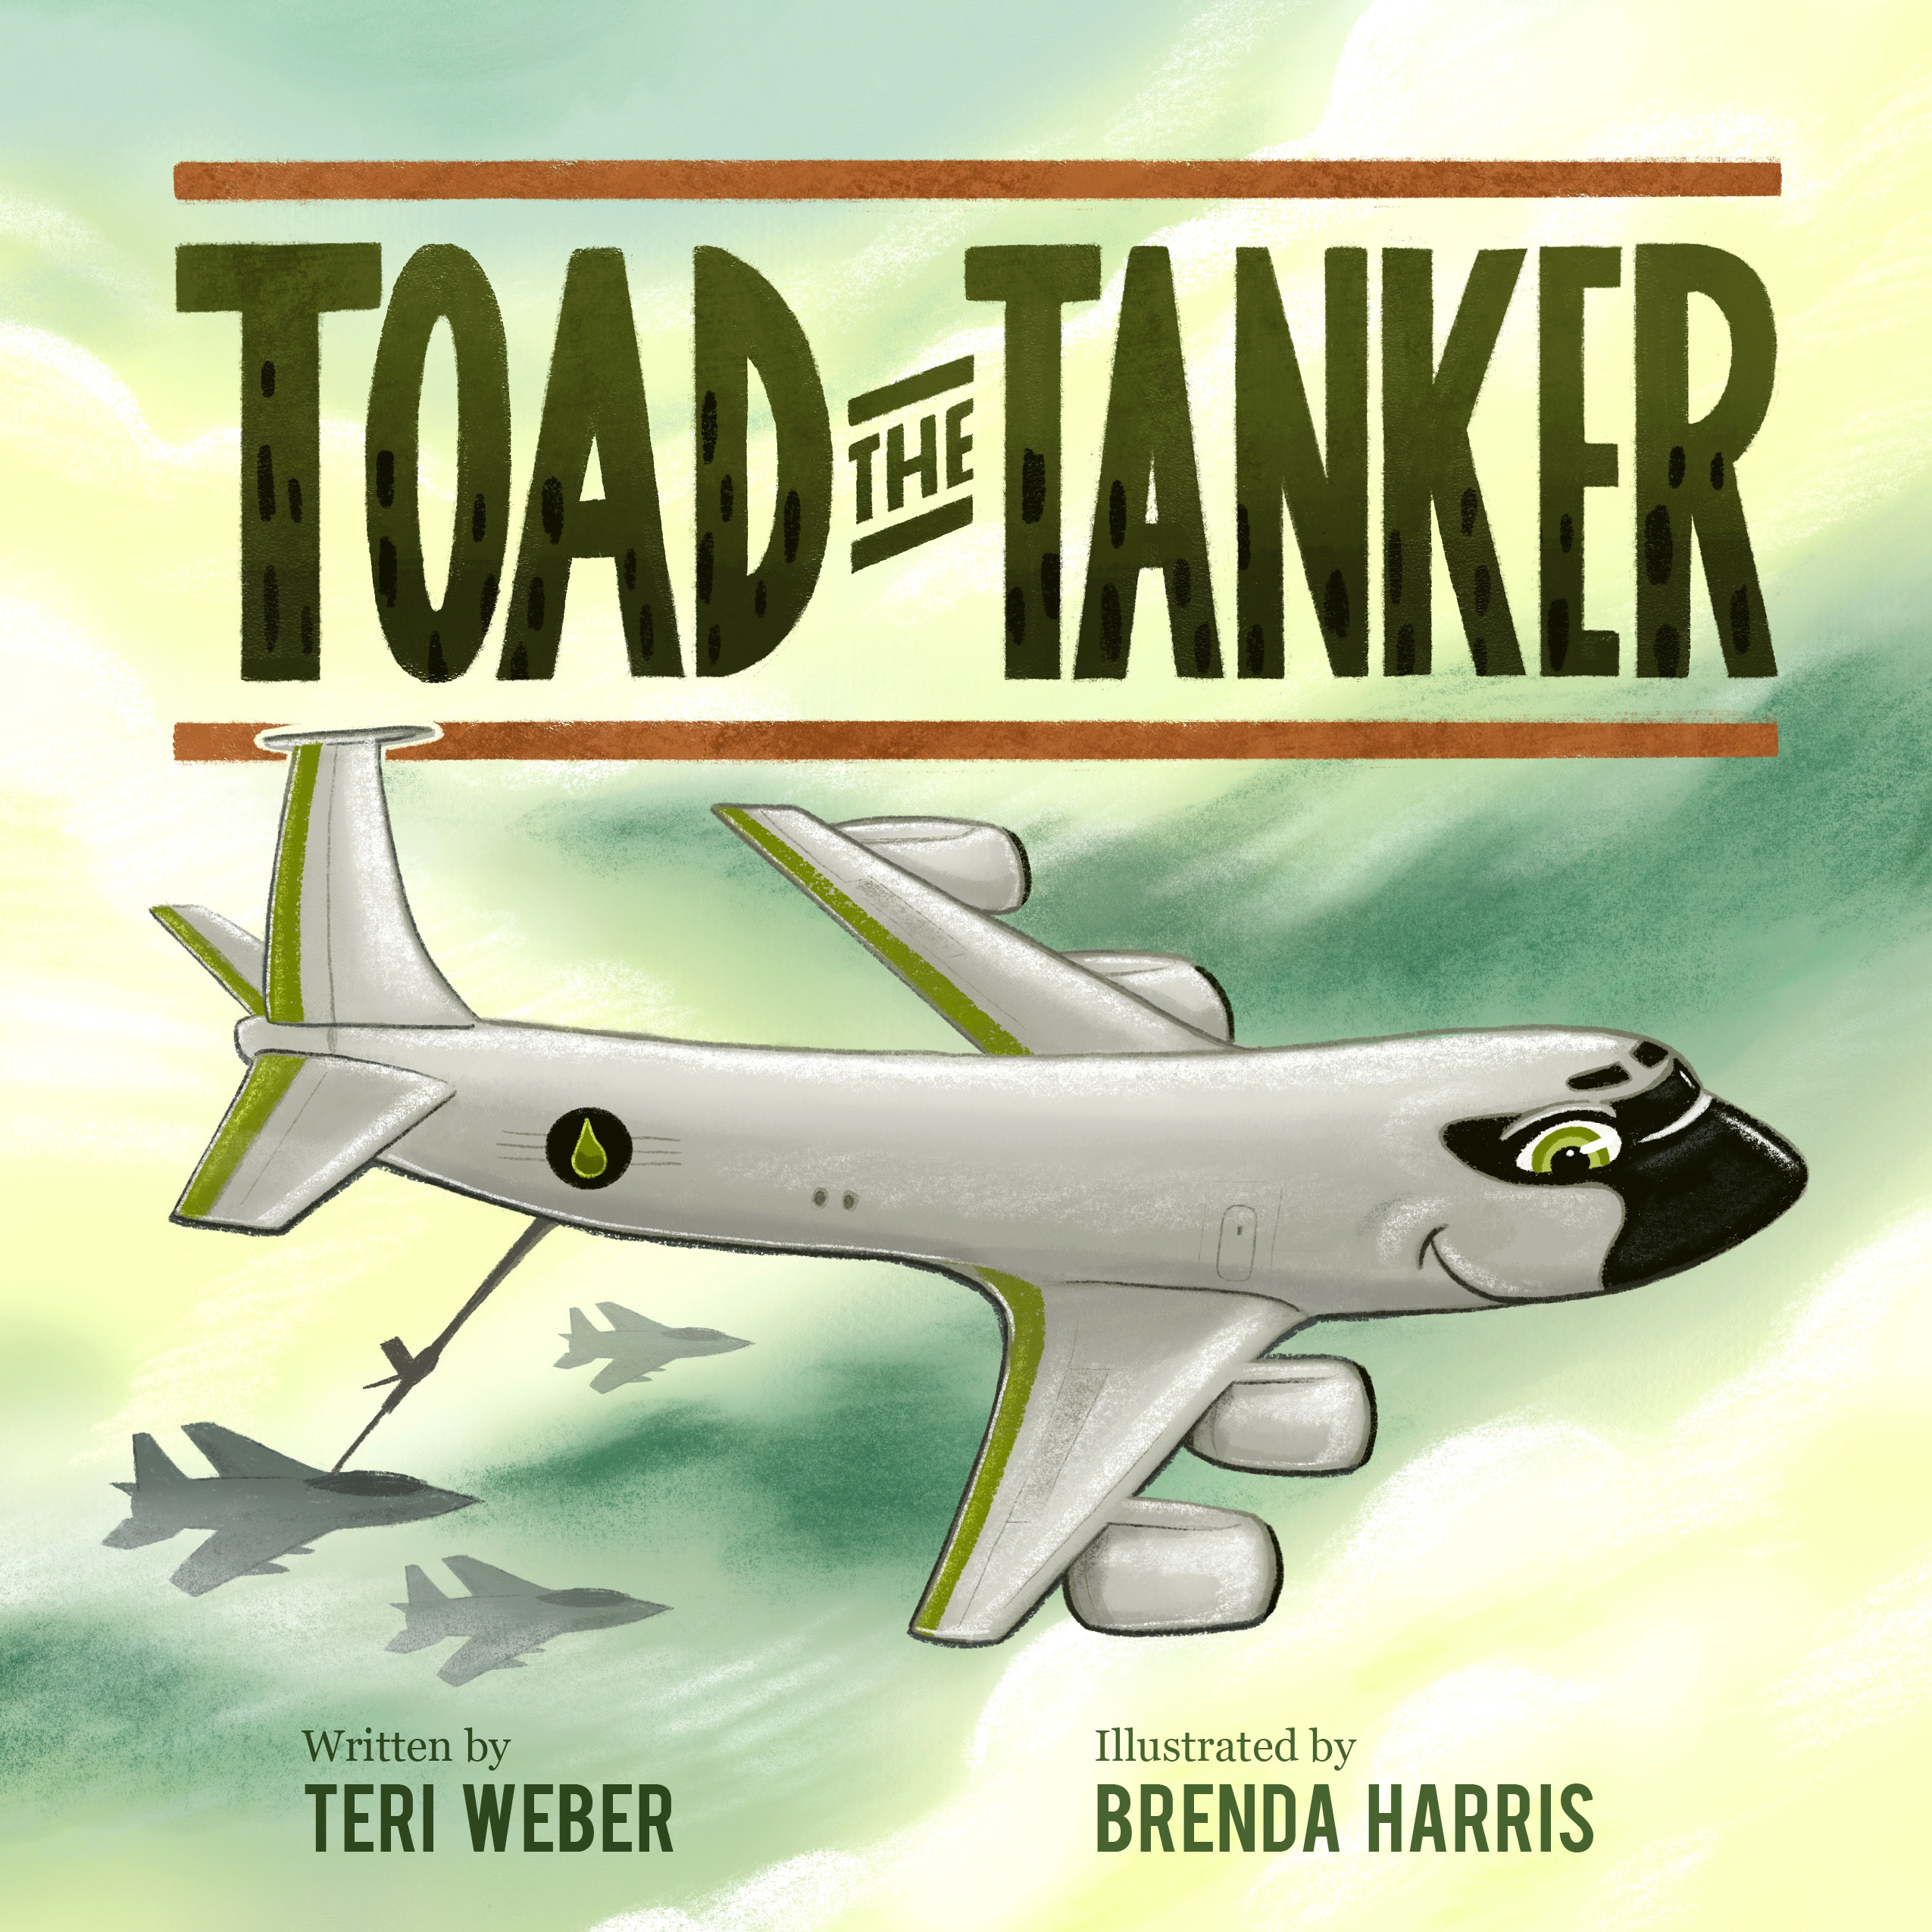 cover for Toad the Tanker by Teri Weber, illustrated by Brenda Harris, published by Elva Resa Publishing, distributed by Military Family Books, Operation AviationTM series, ISBN 979-8-88752-022-3 (HC ENG)